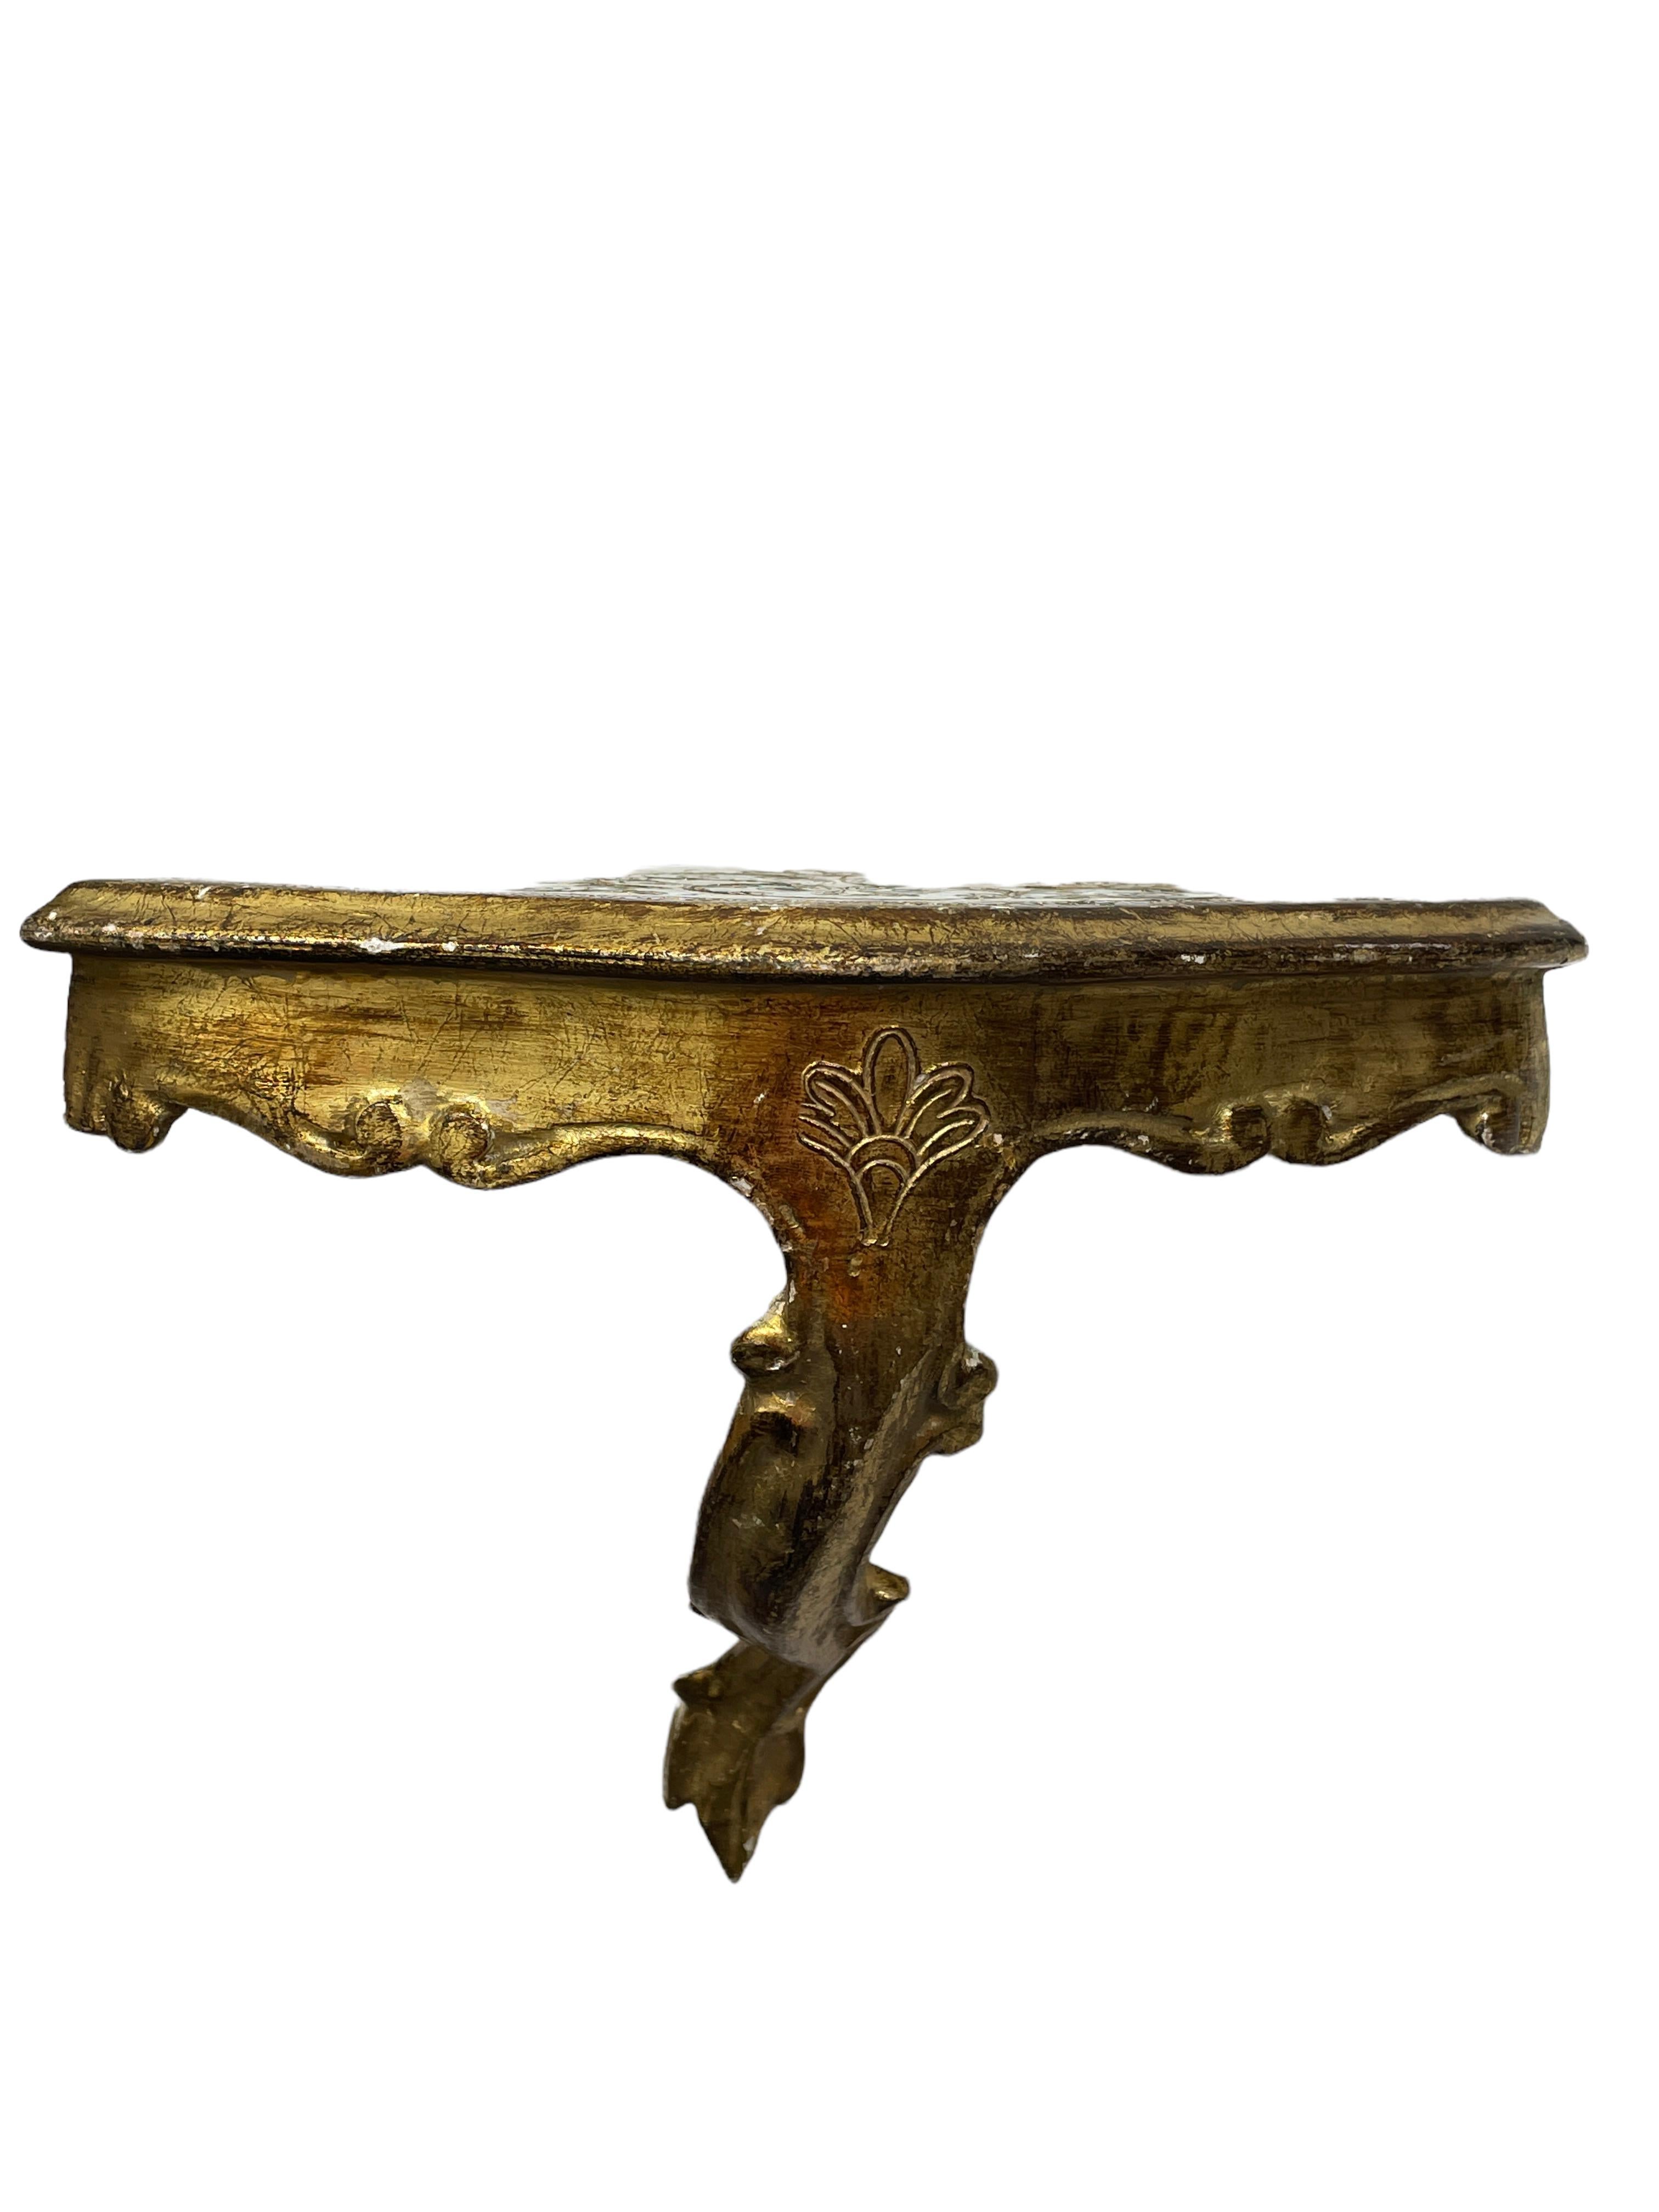 Vintage Florence Wall Corner Shelf Console, Gilded Carved Wood, Florentine Style For Sale 3